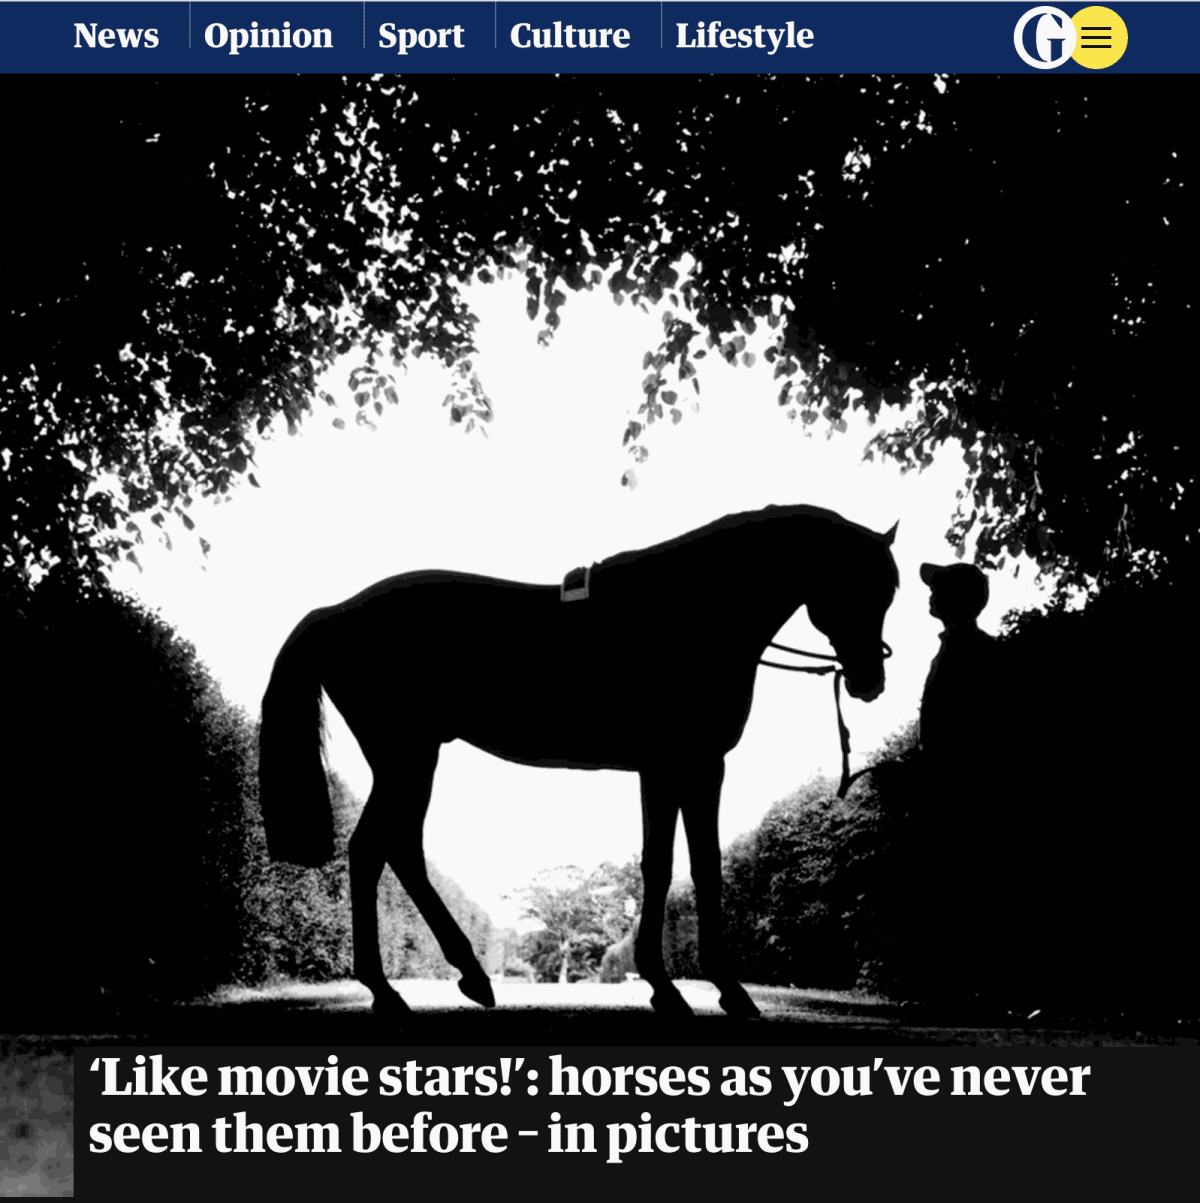 Recent press: "Like movie stars!" - horses as you've never seen them before - in pictures in The Guardian